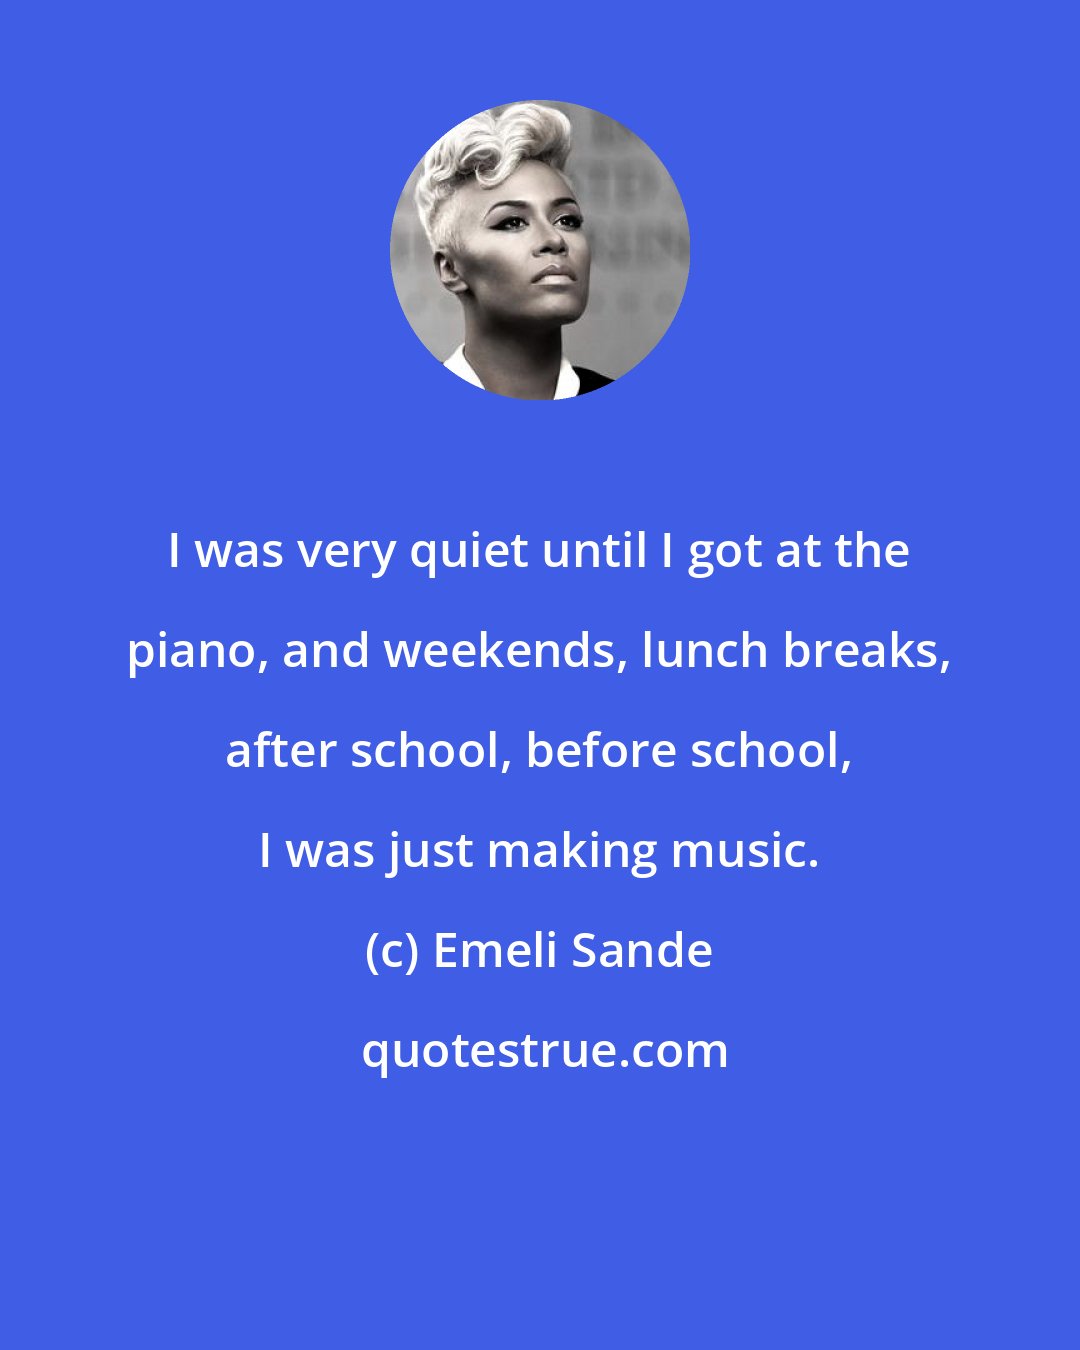 Emeli Sande: I was very quiet until I got at the piano, and weekends, lunch breaks, after school, before school, I was just making music.